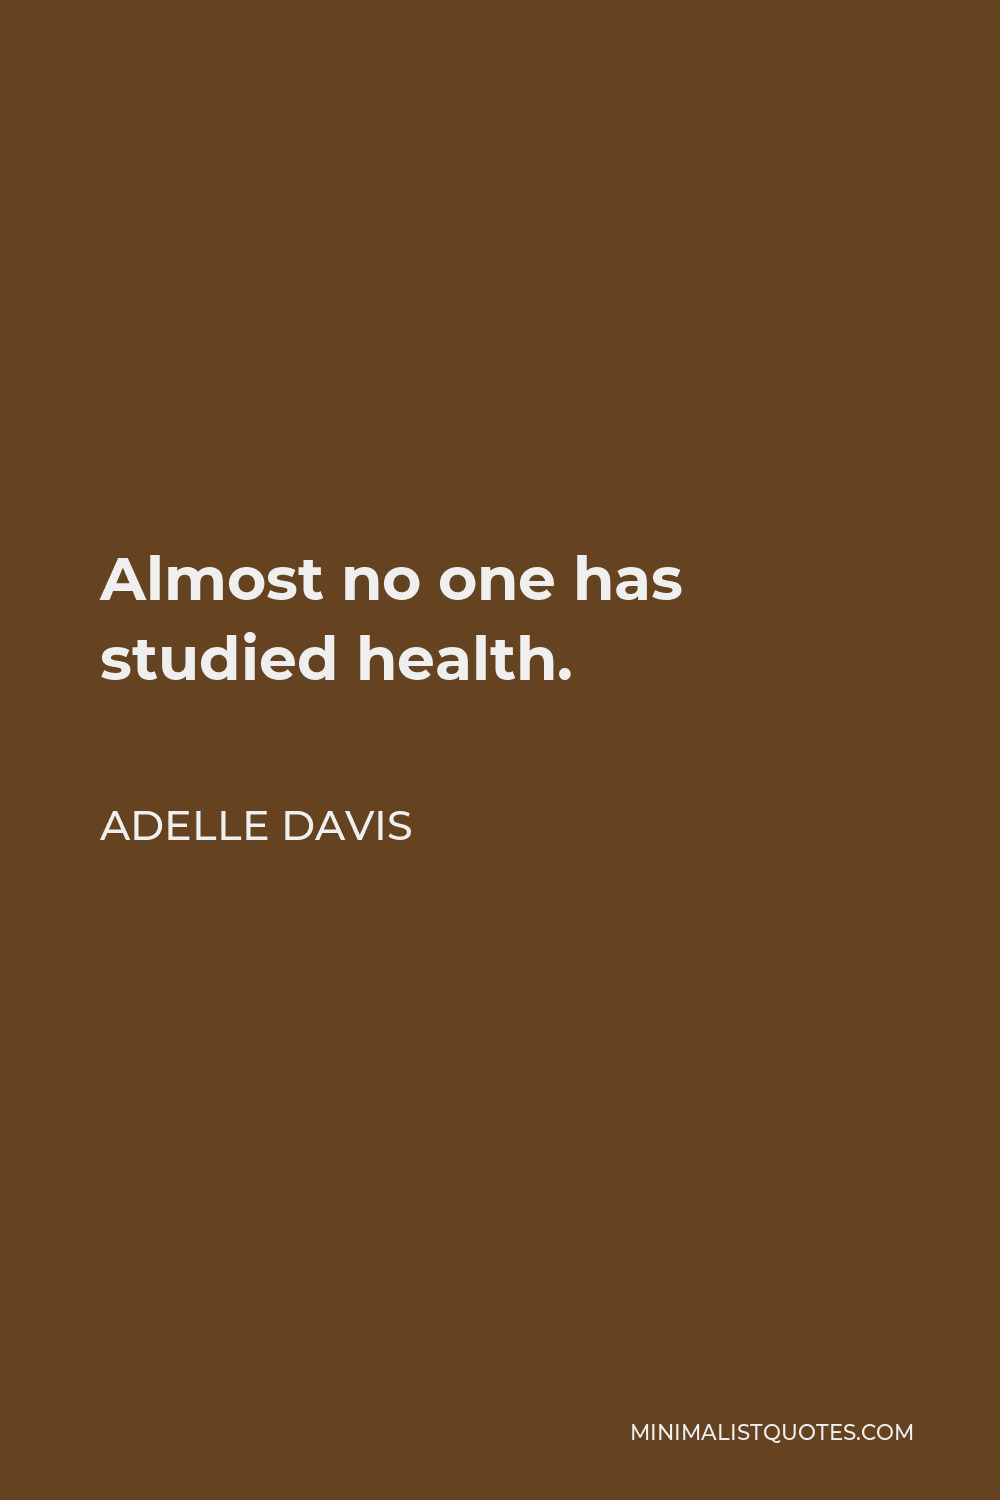 Adelle Davis Quote - Almost no one has studied health.